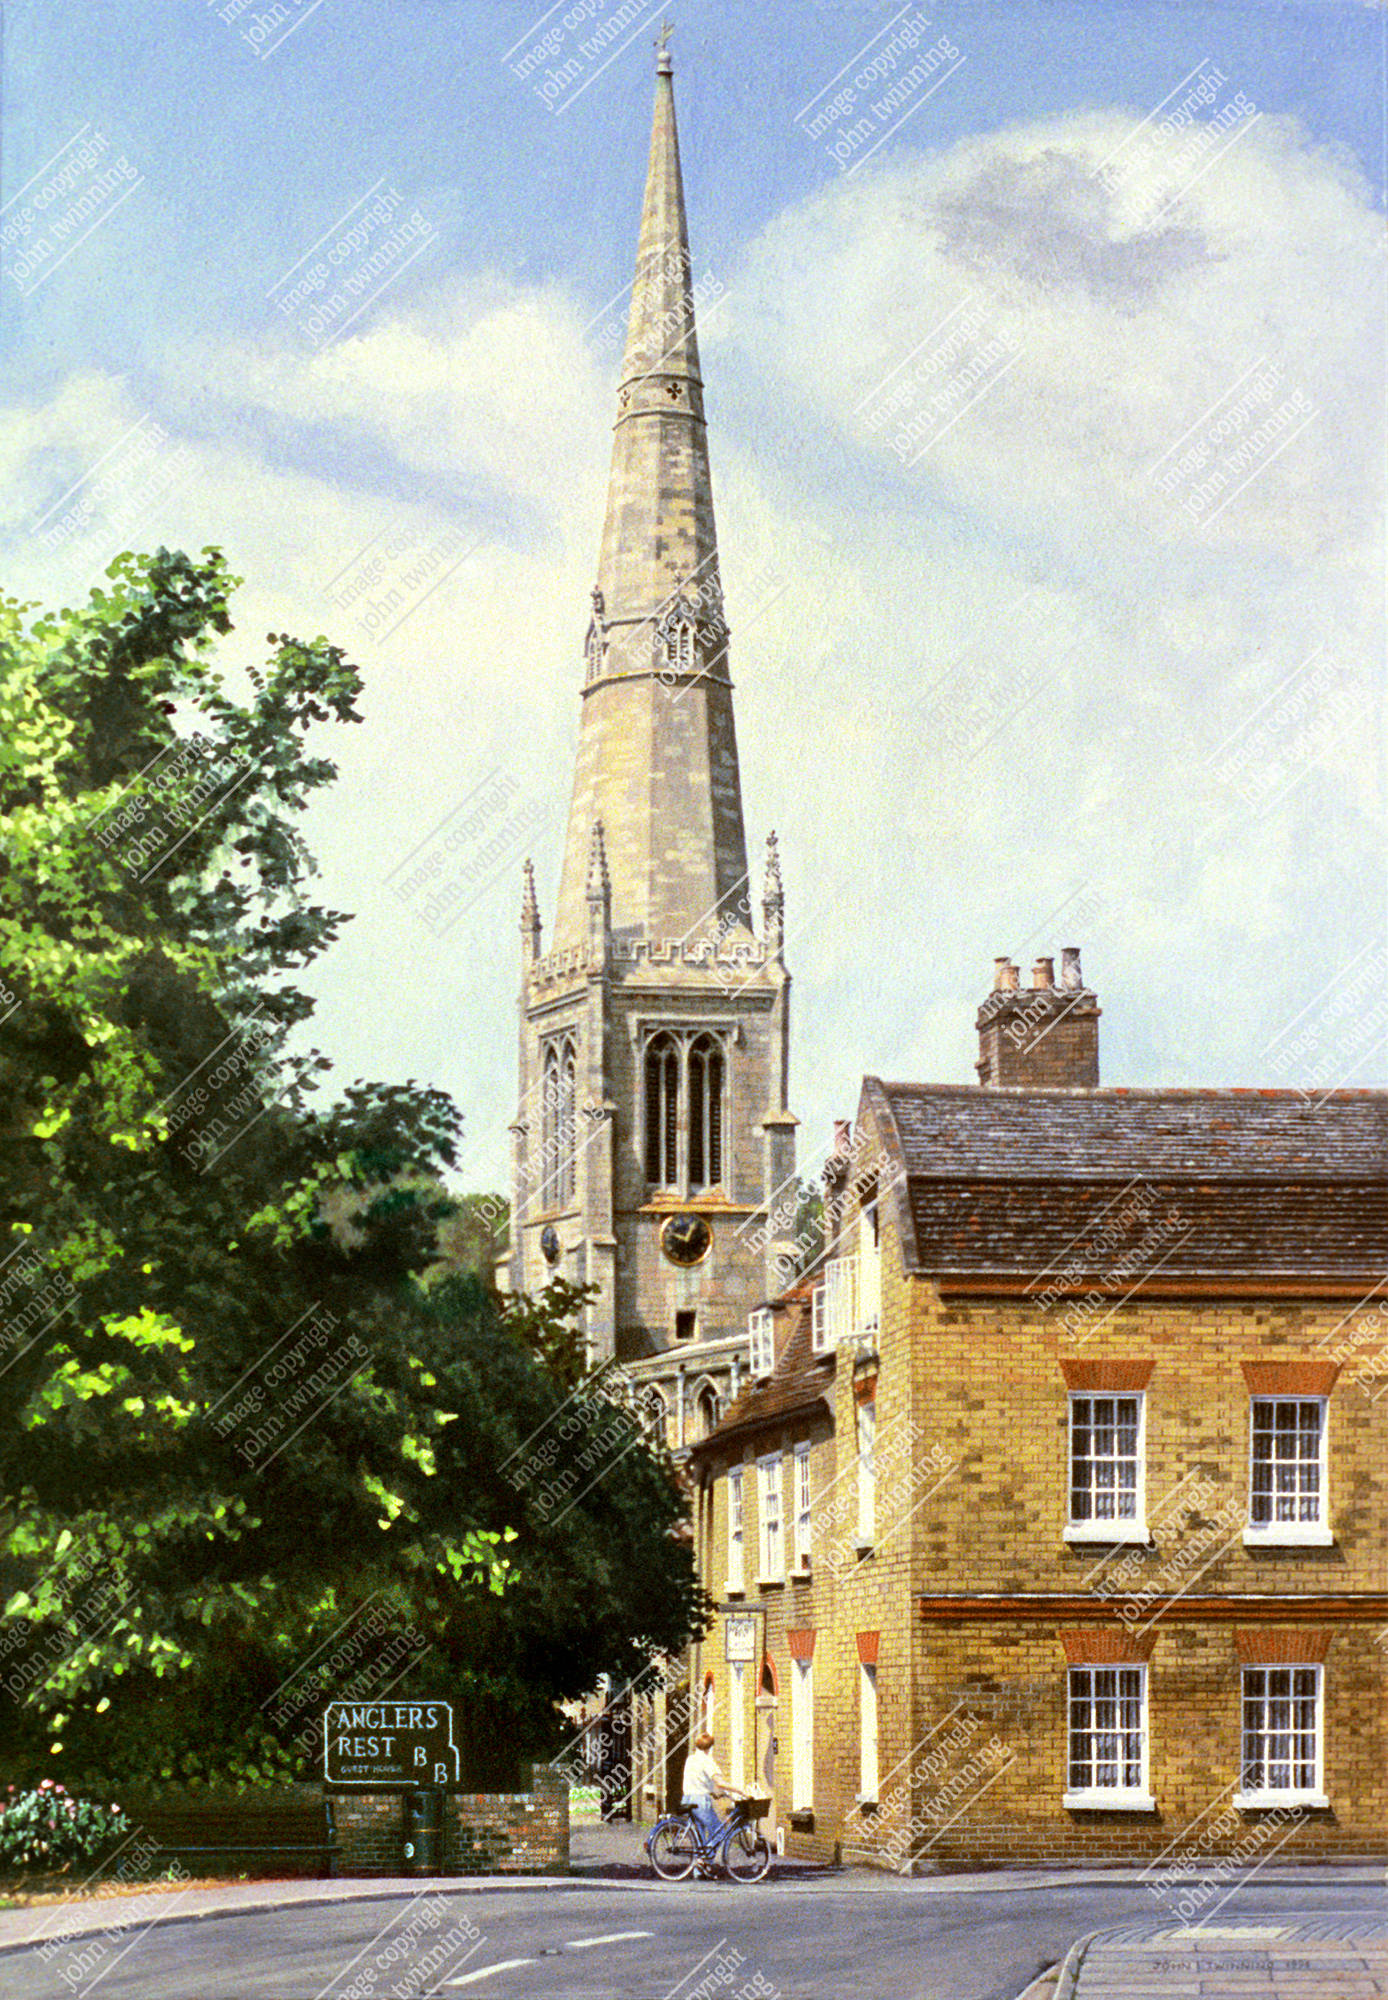 ‘The Parish Church And Angler’s Rest, St. Ives’ – art print from a watercolour painting of this market town’s parish church